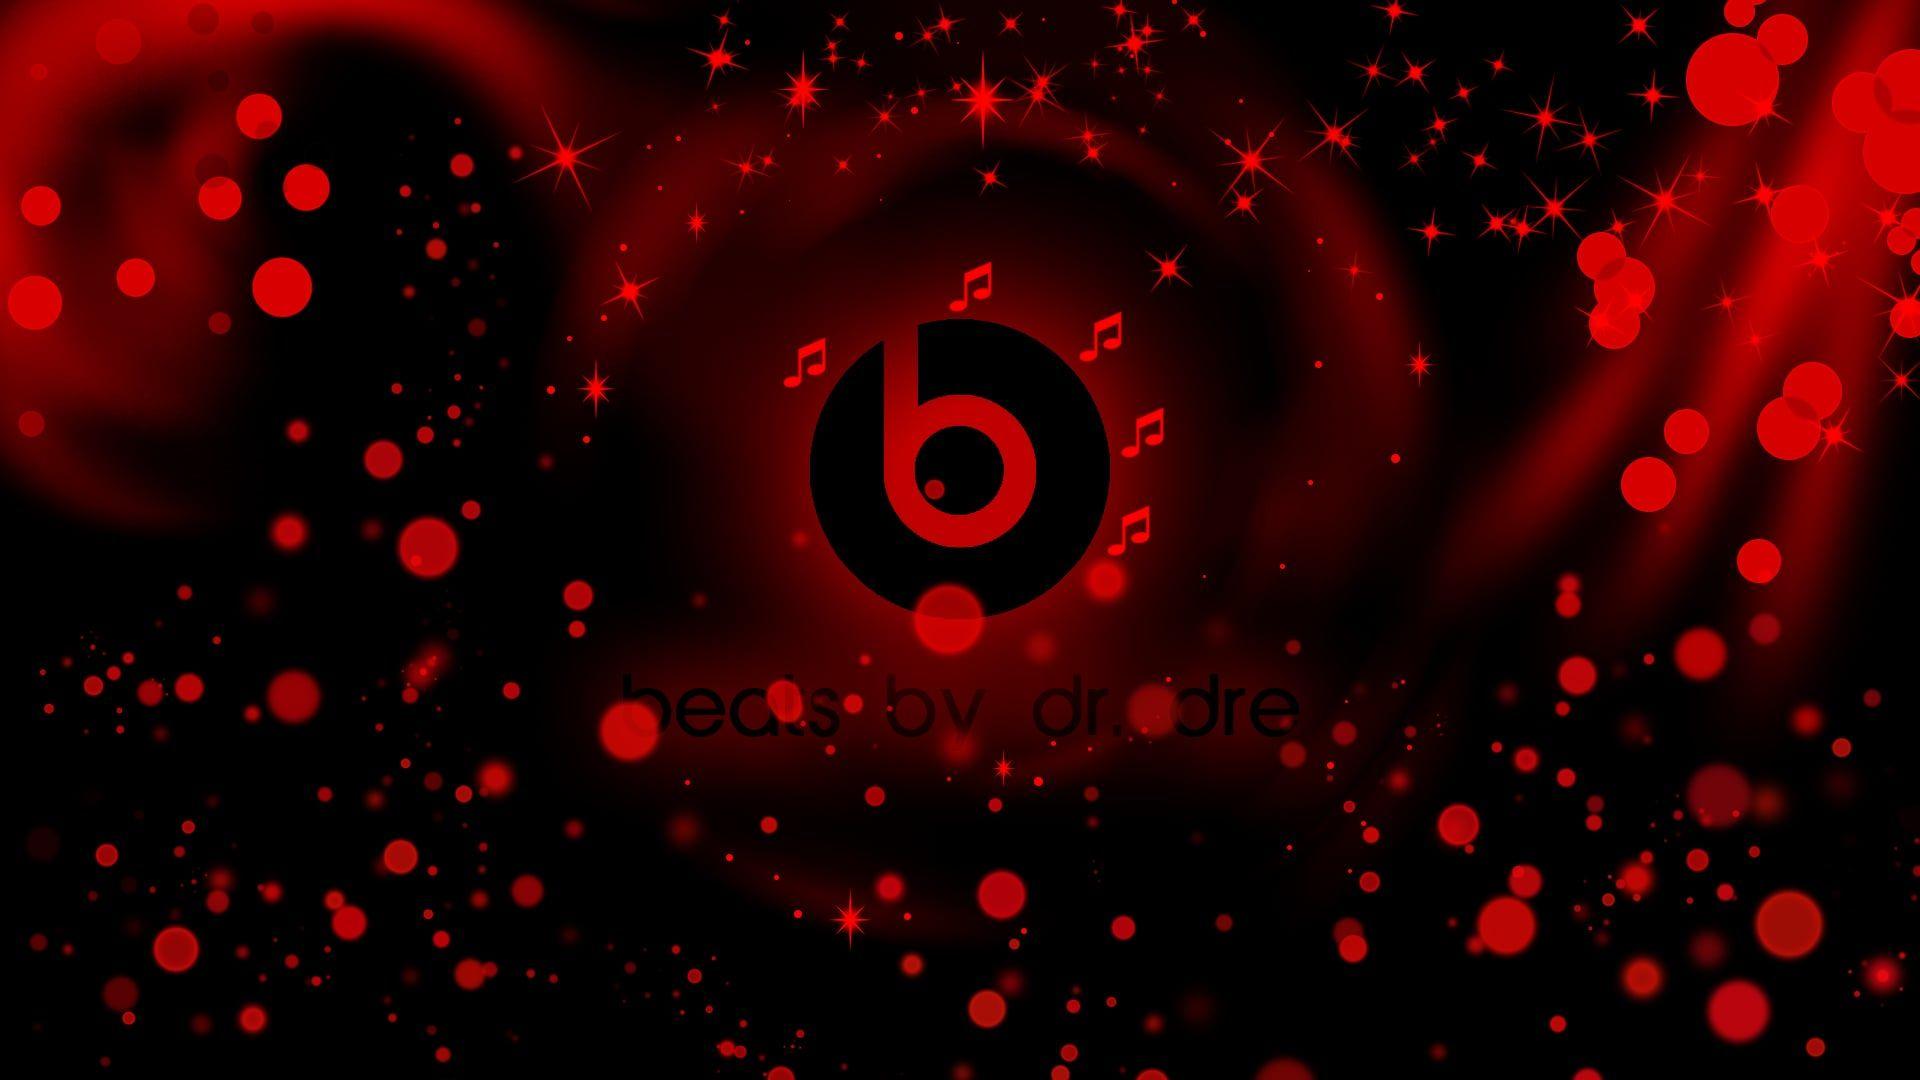 Cool Beats Logo - Beats By Dr Dre HD wallpapers Free Download Headphones